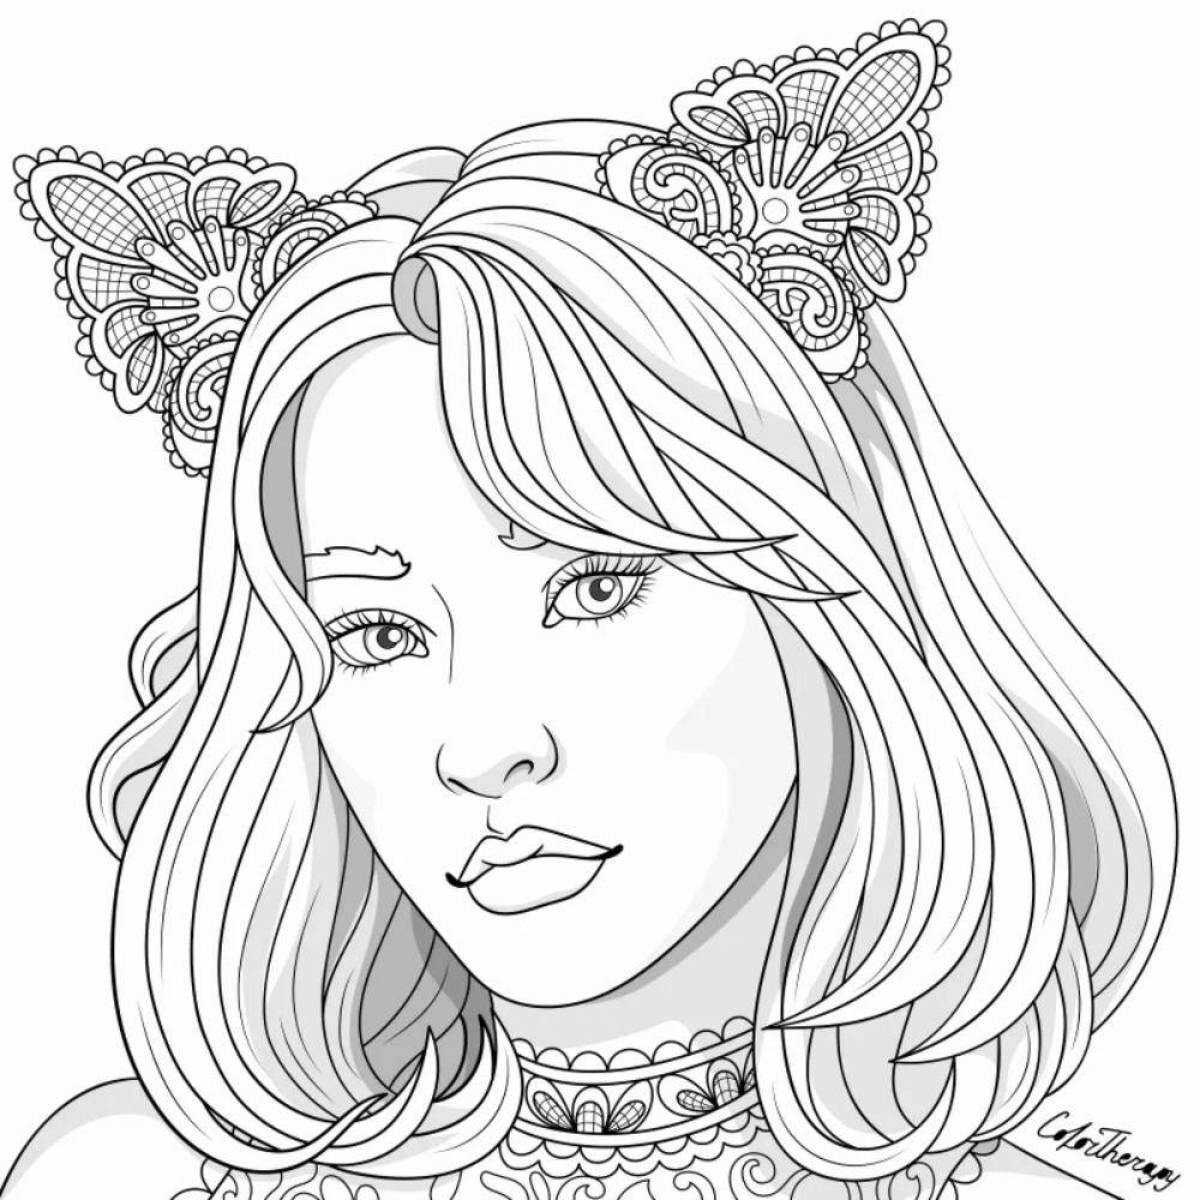 Luminous coloring book for girls 8-10 years old